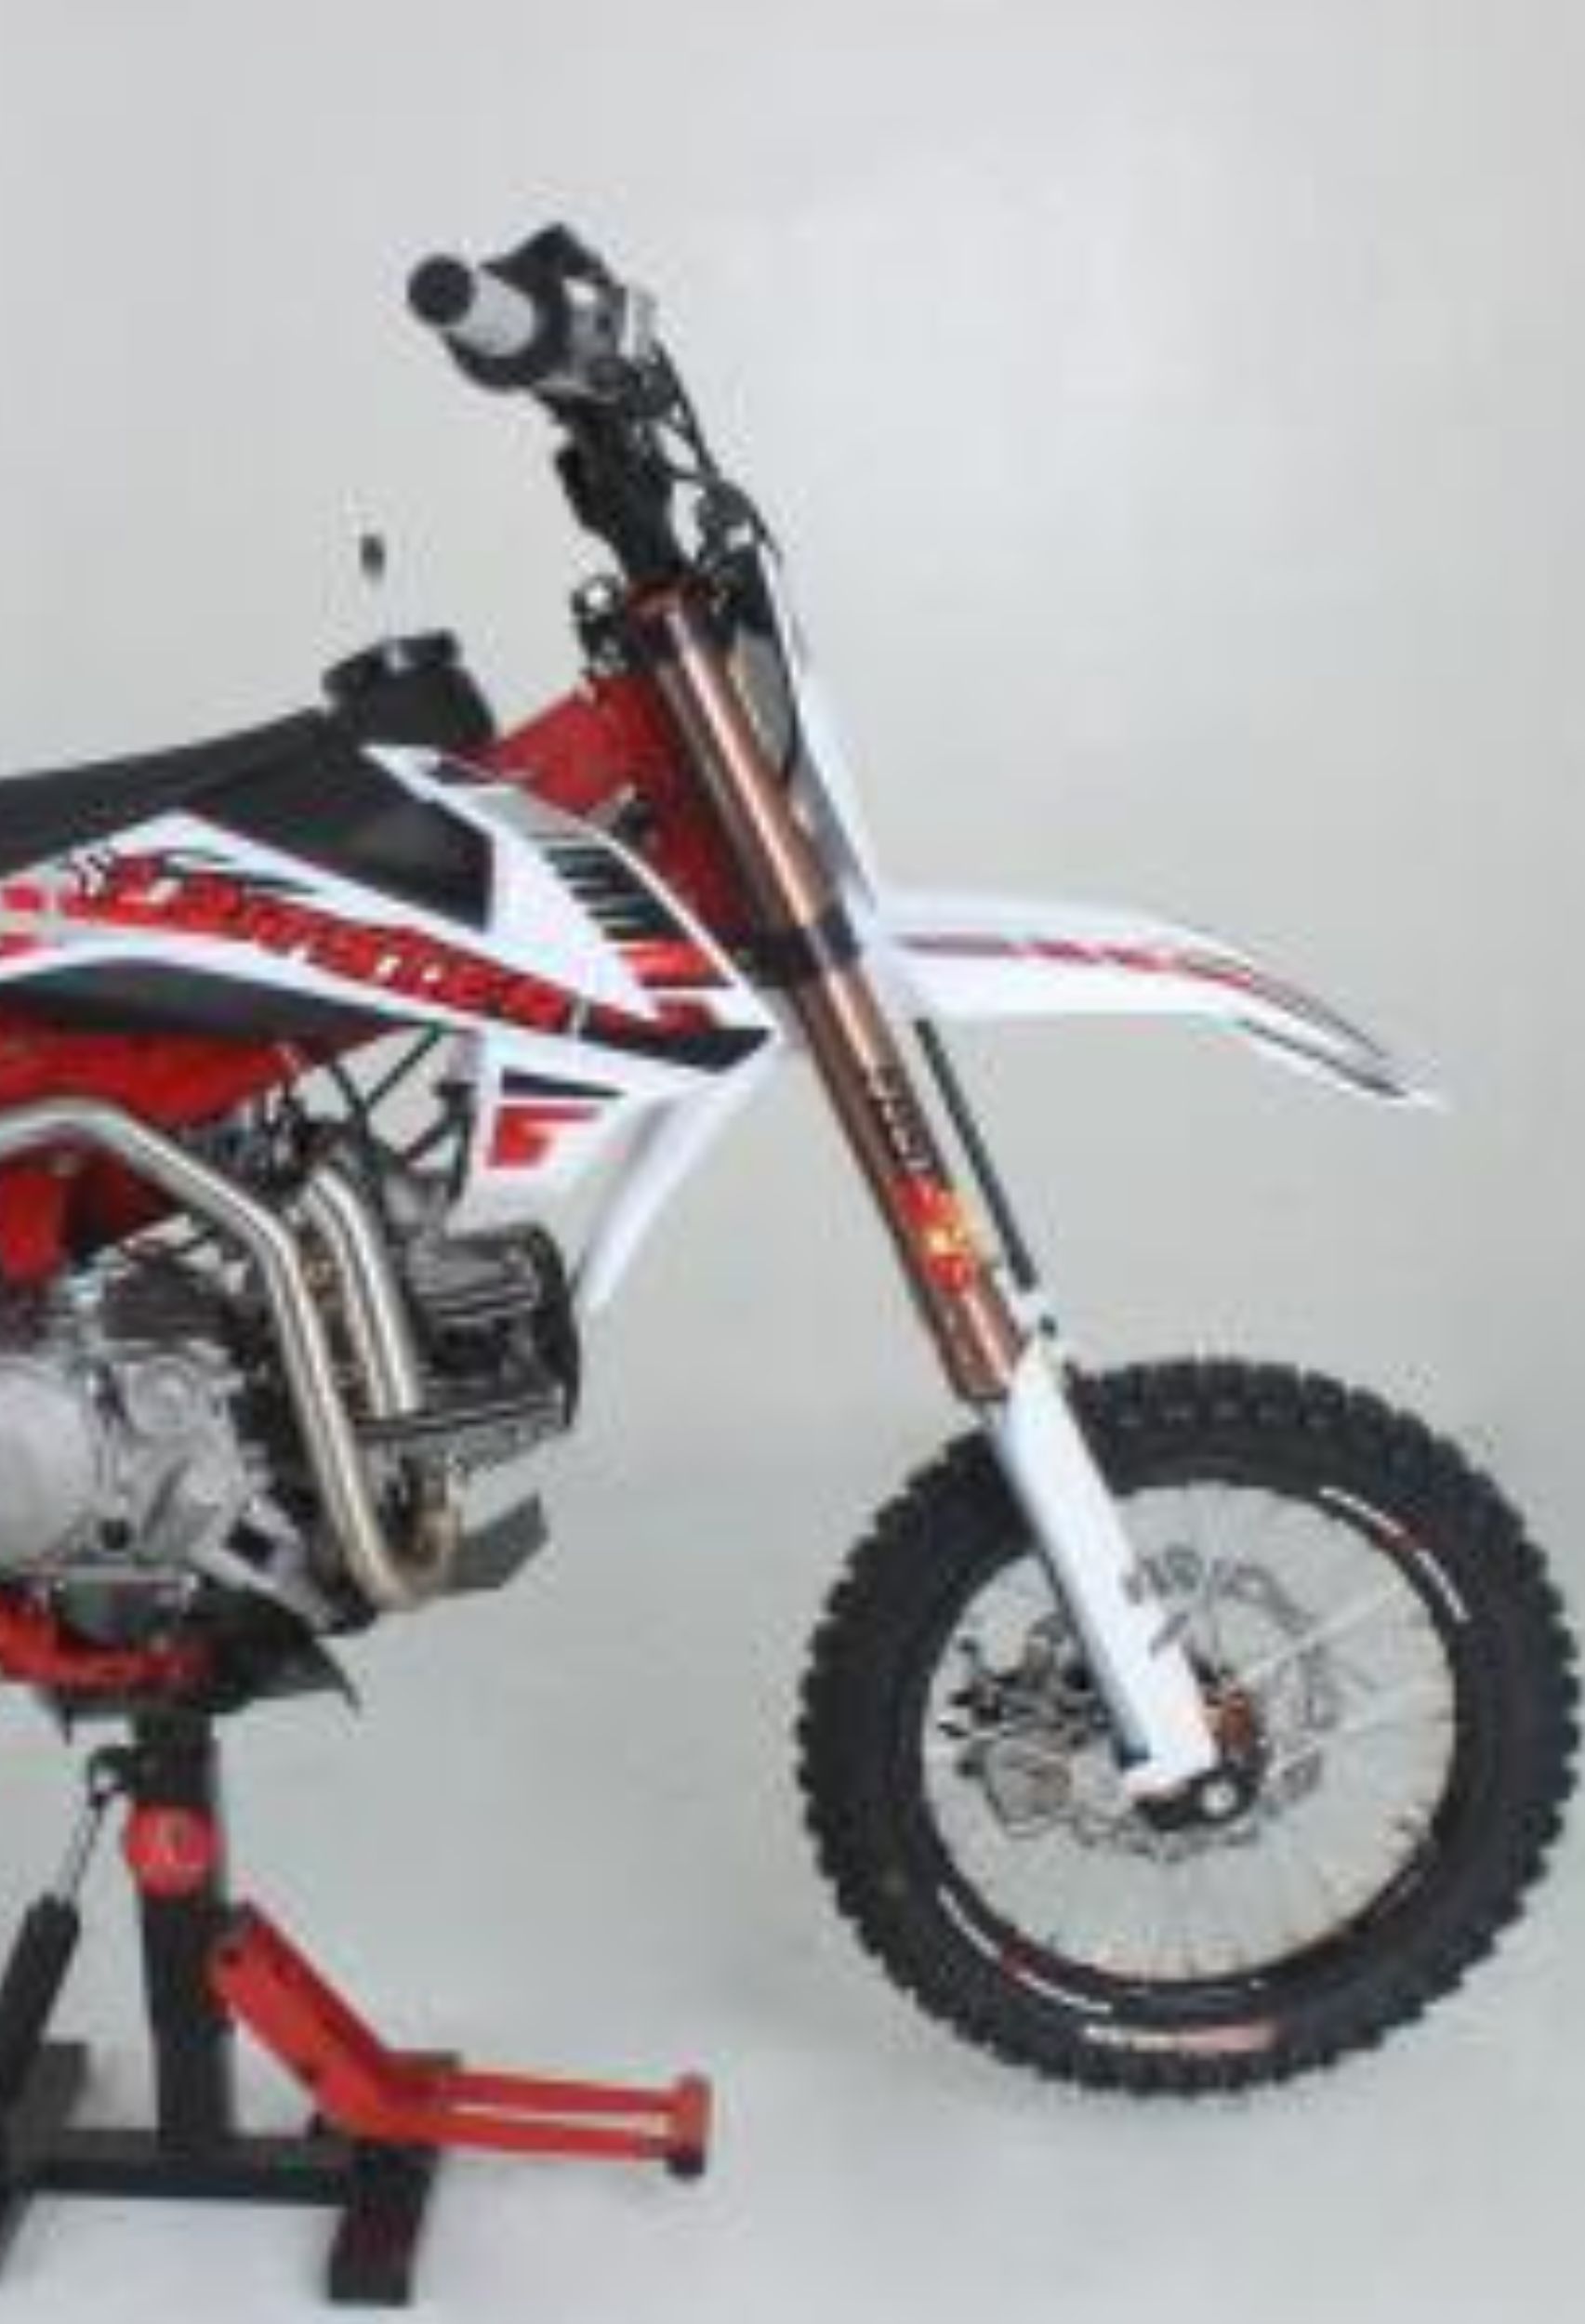 A Review On The Uses And Benefits Of Pitbike